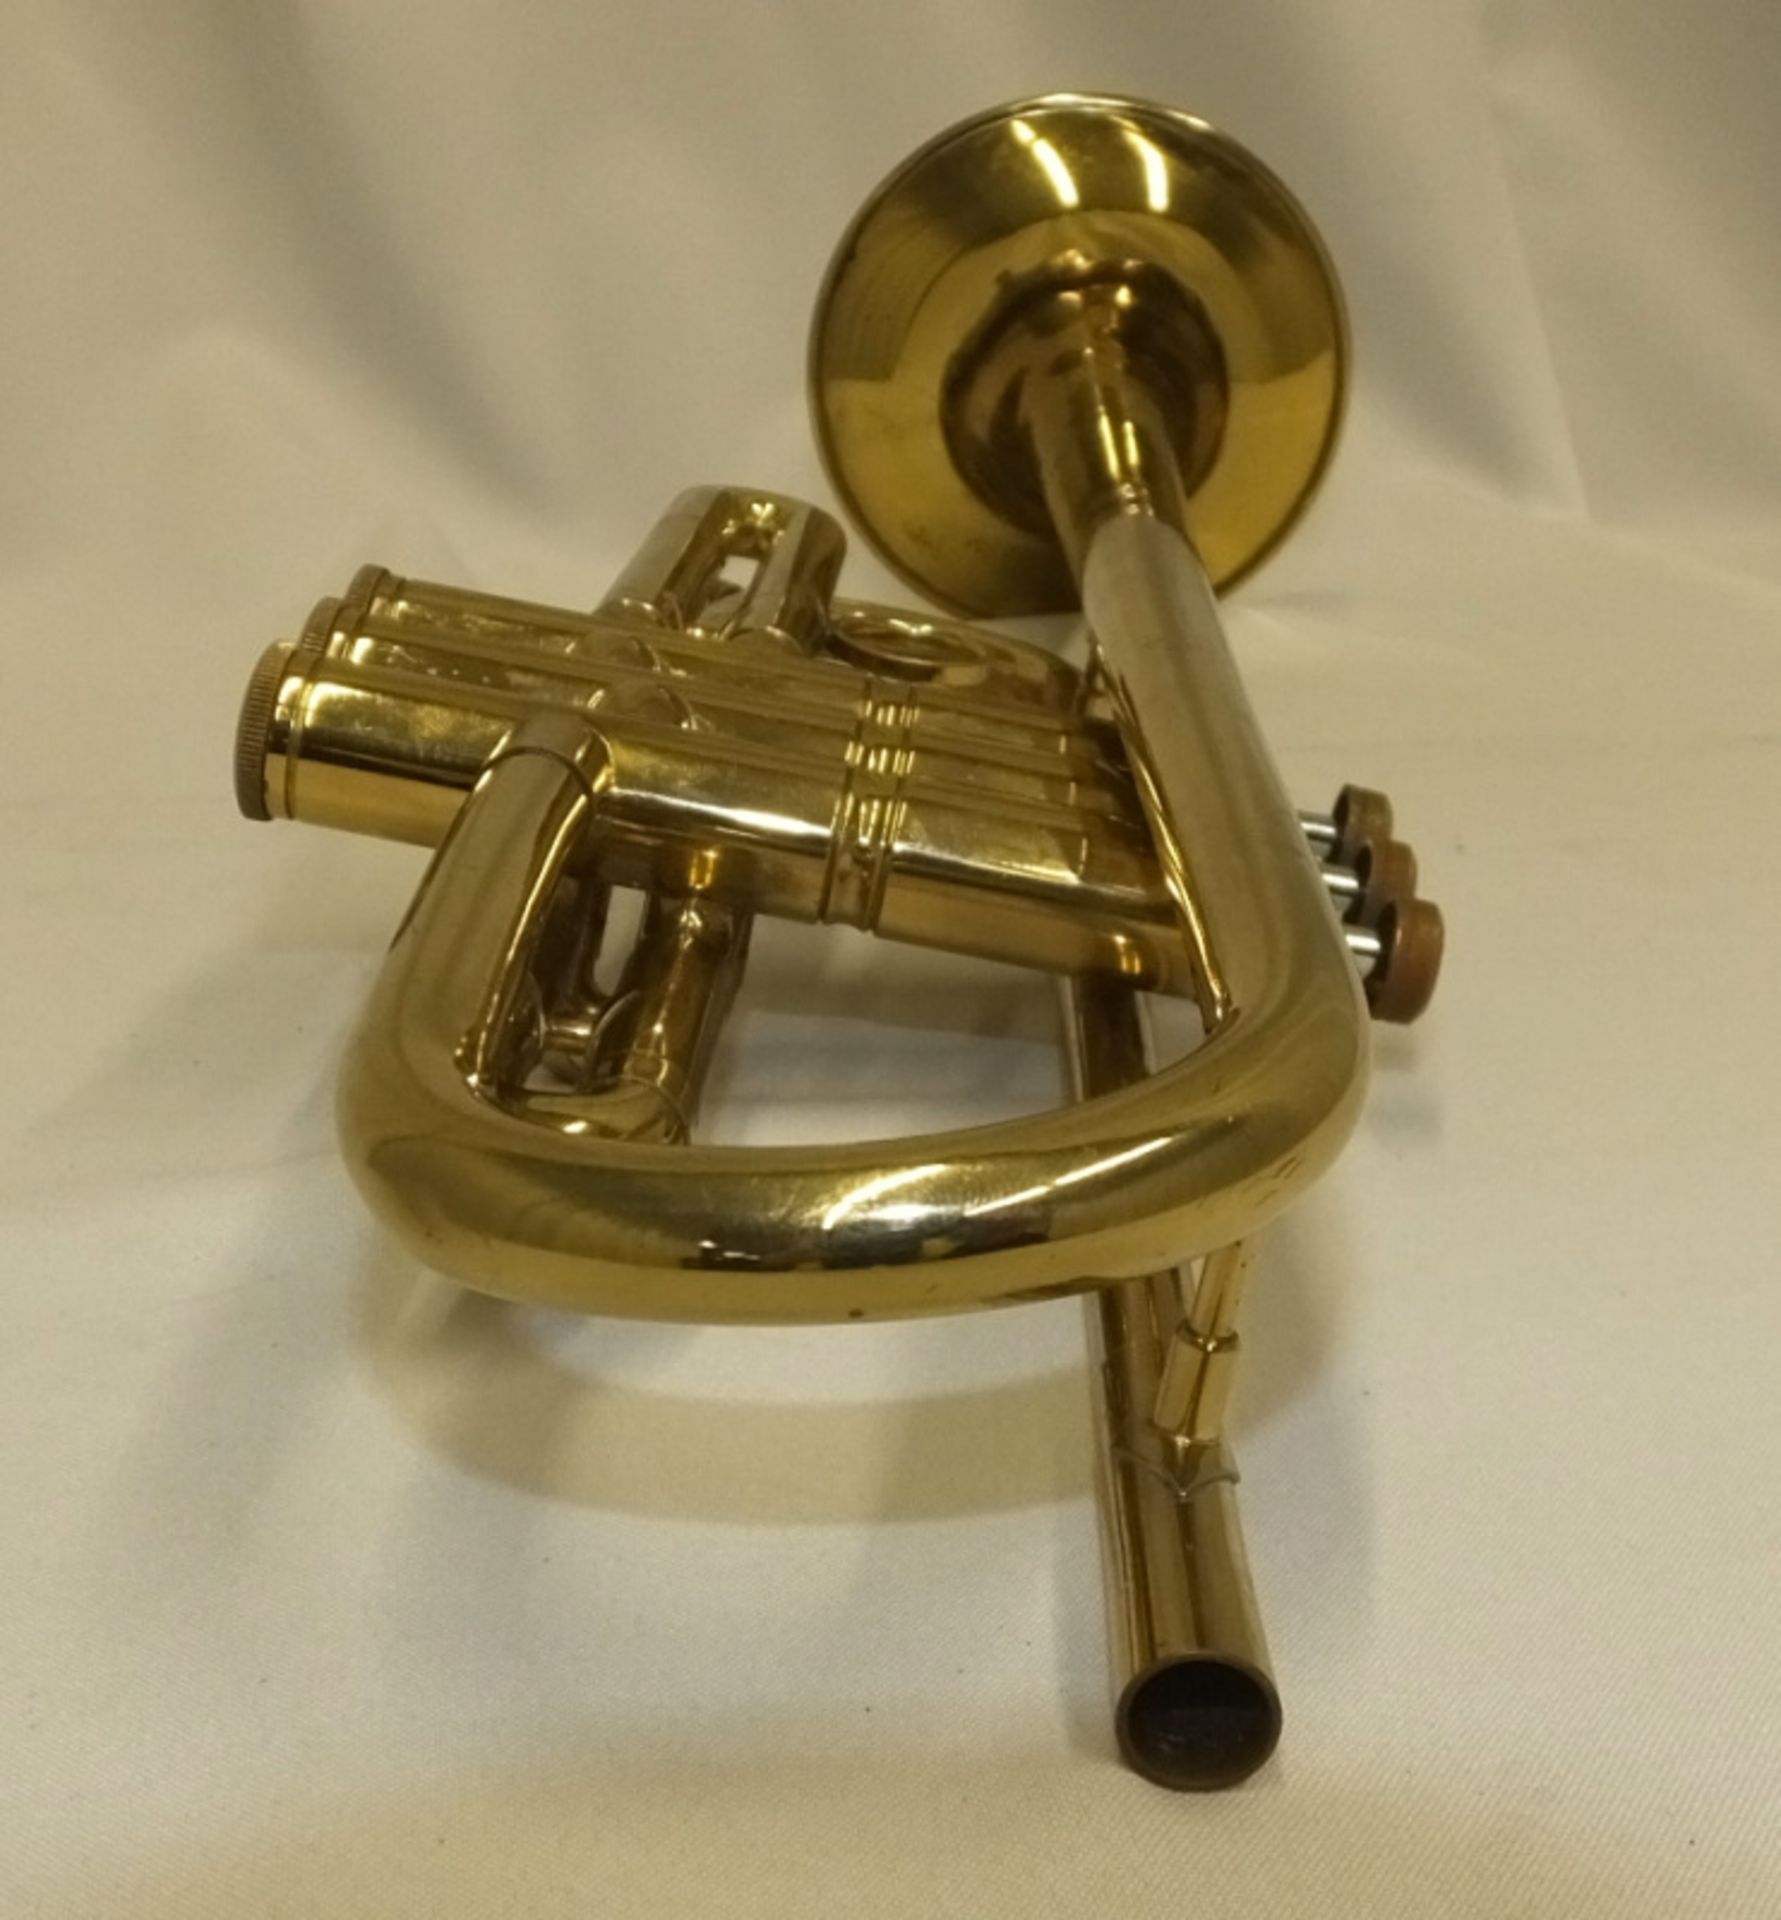 Corton 80 Trumpet in case - serial number 056228 - Please check photos carefully - Image 7 of 11